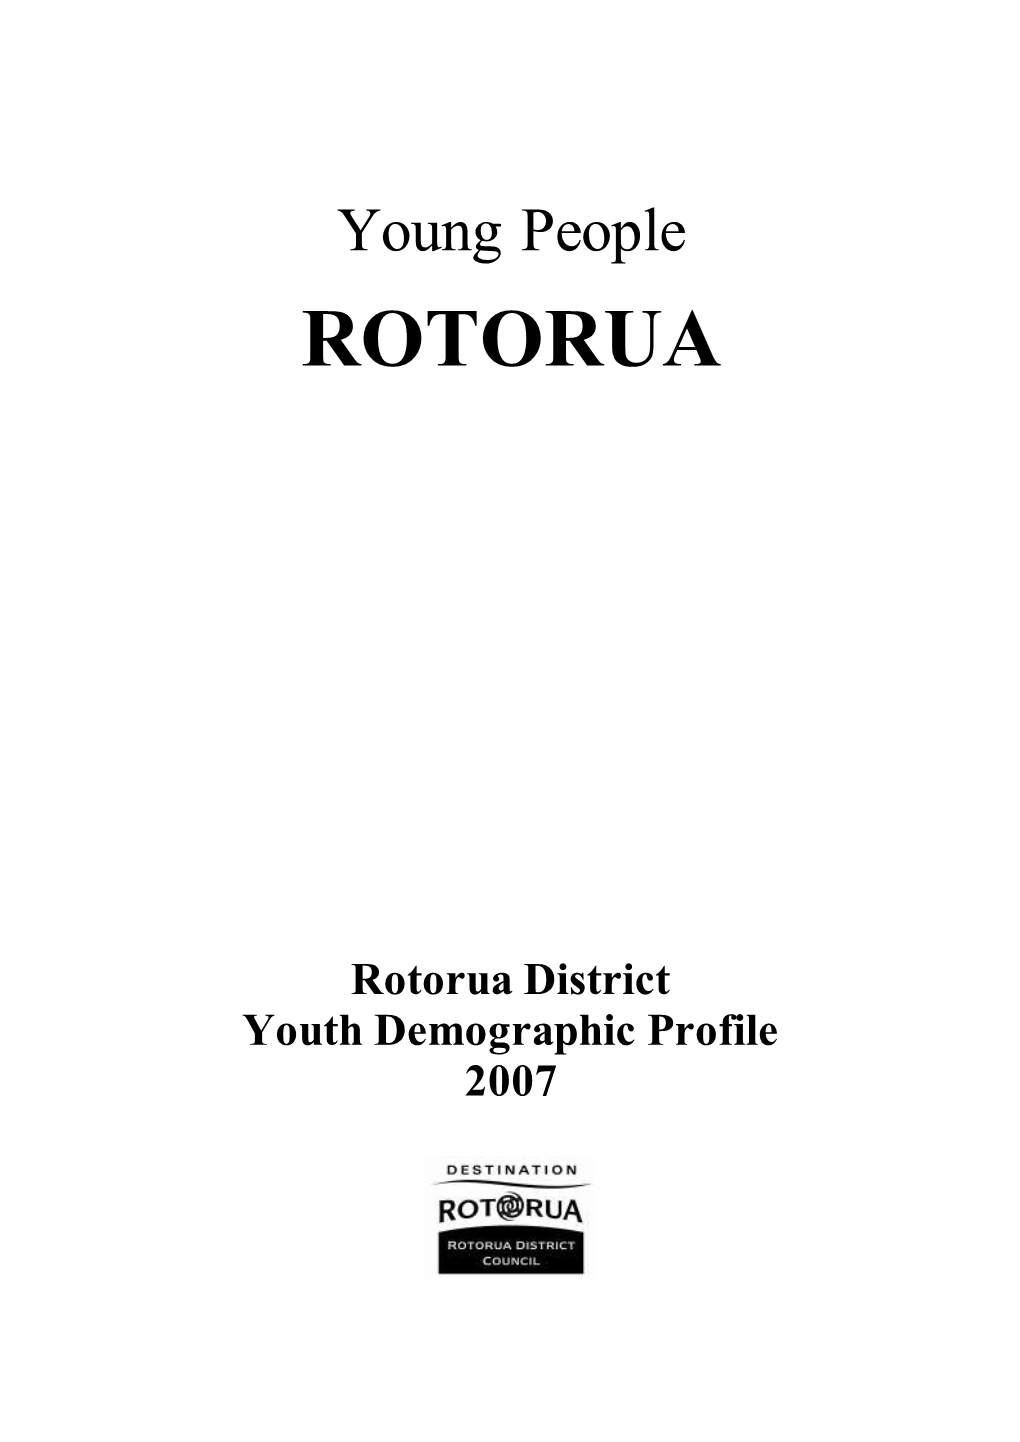 Youth Demographic Profile 2007